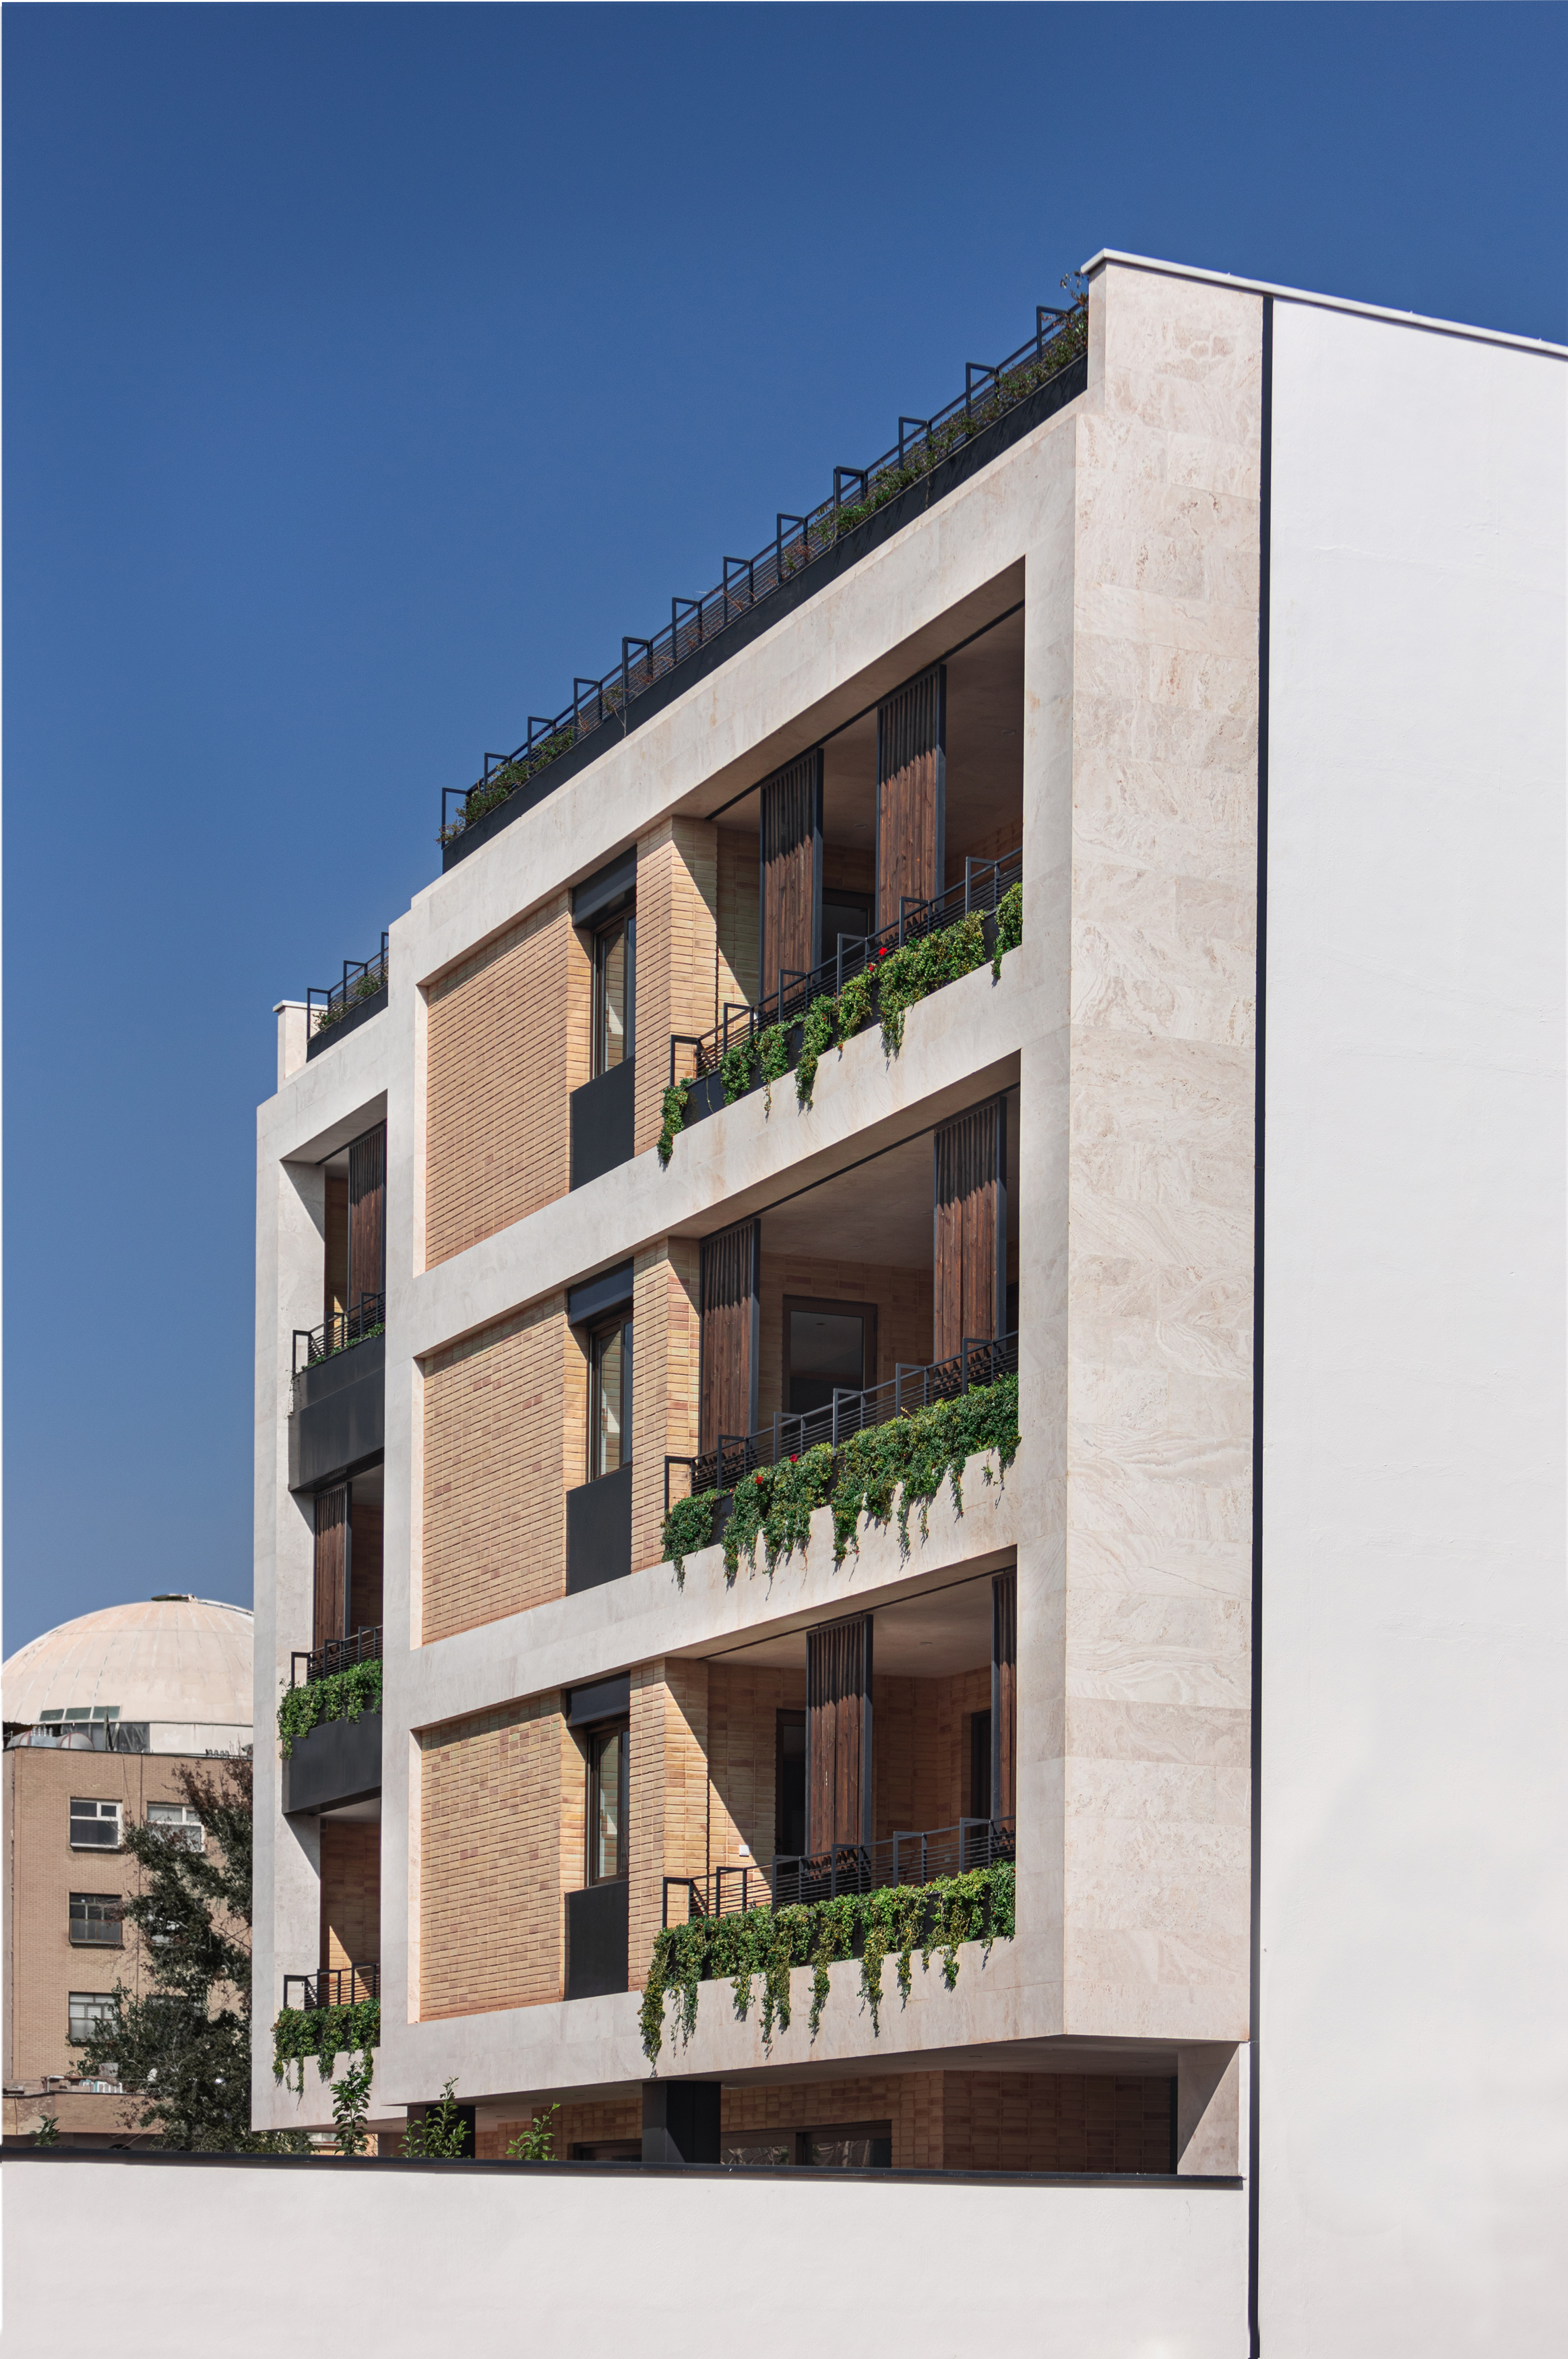 picture no. 13 ofApartment No. 05 project, designed by Ahmad Ghodsimanesh & Partners